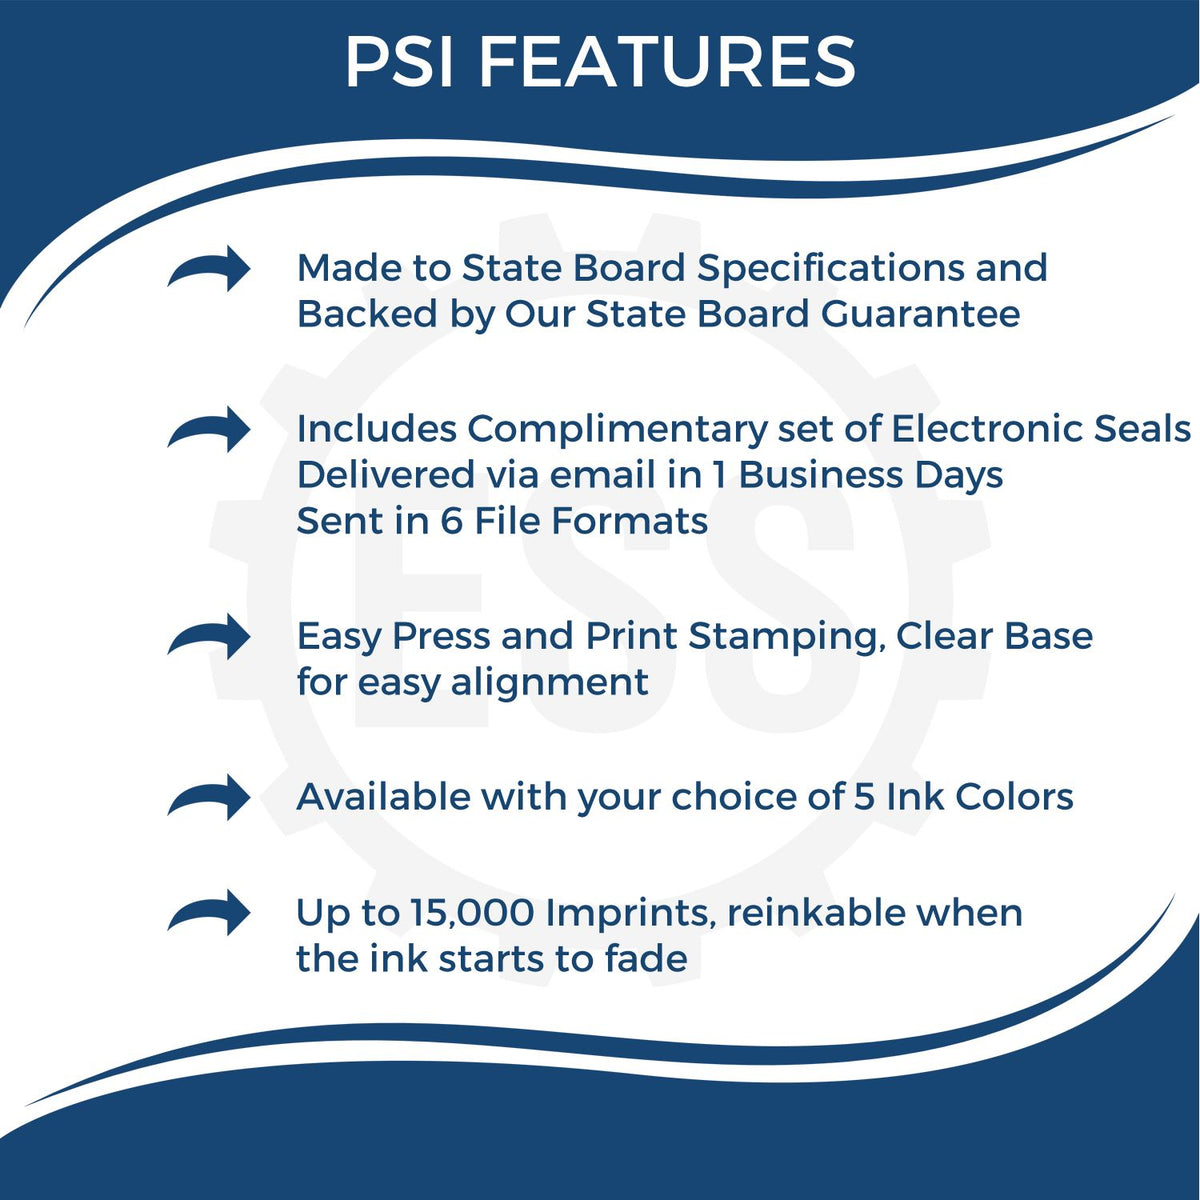 A picture of an infographic highlighting the selling points for the PSI Nebraska Notary Stamp